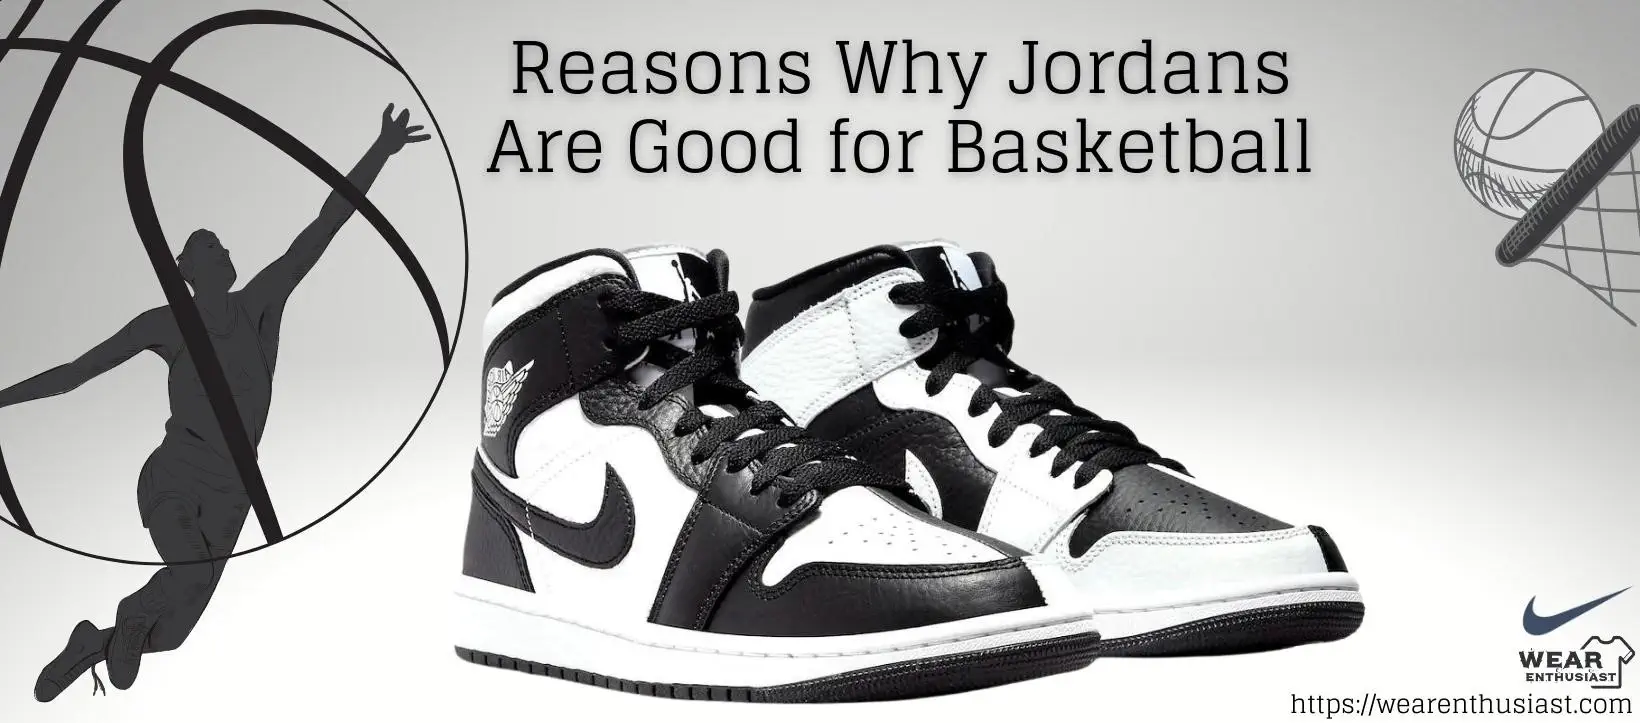 Reasons Why Jordans Are Good for Basketball